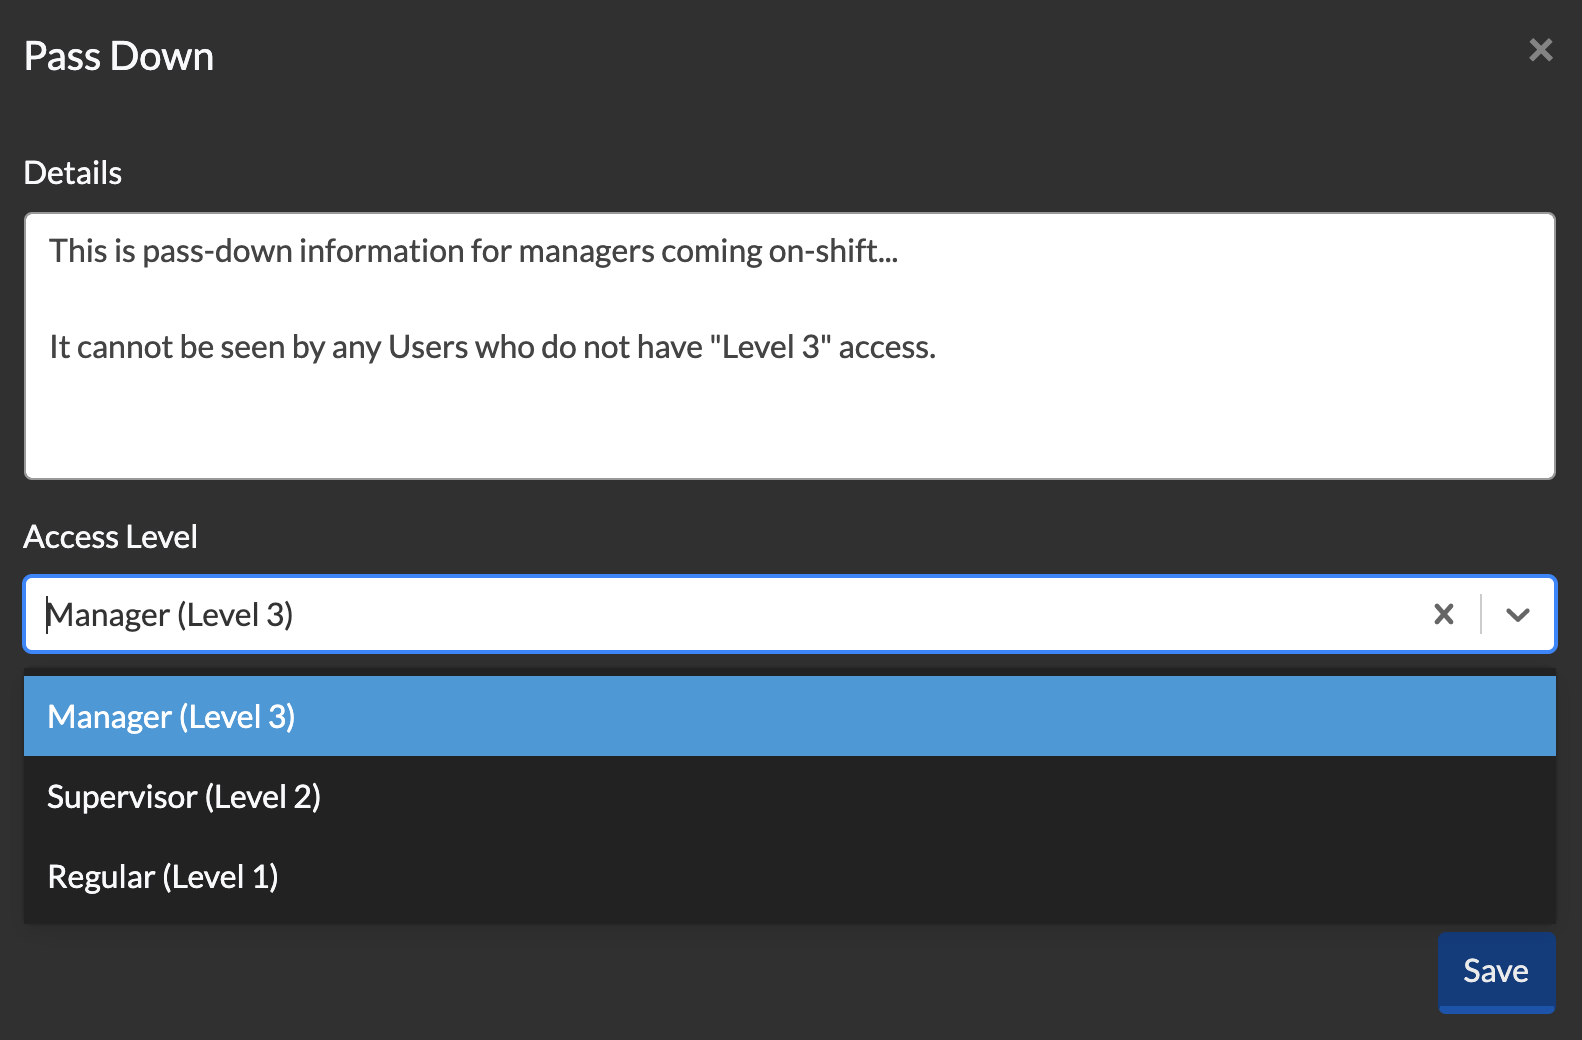 Creating a Pass Down for users with acces level of Manager